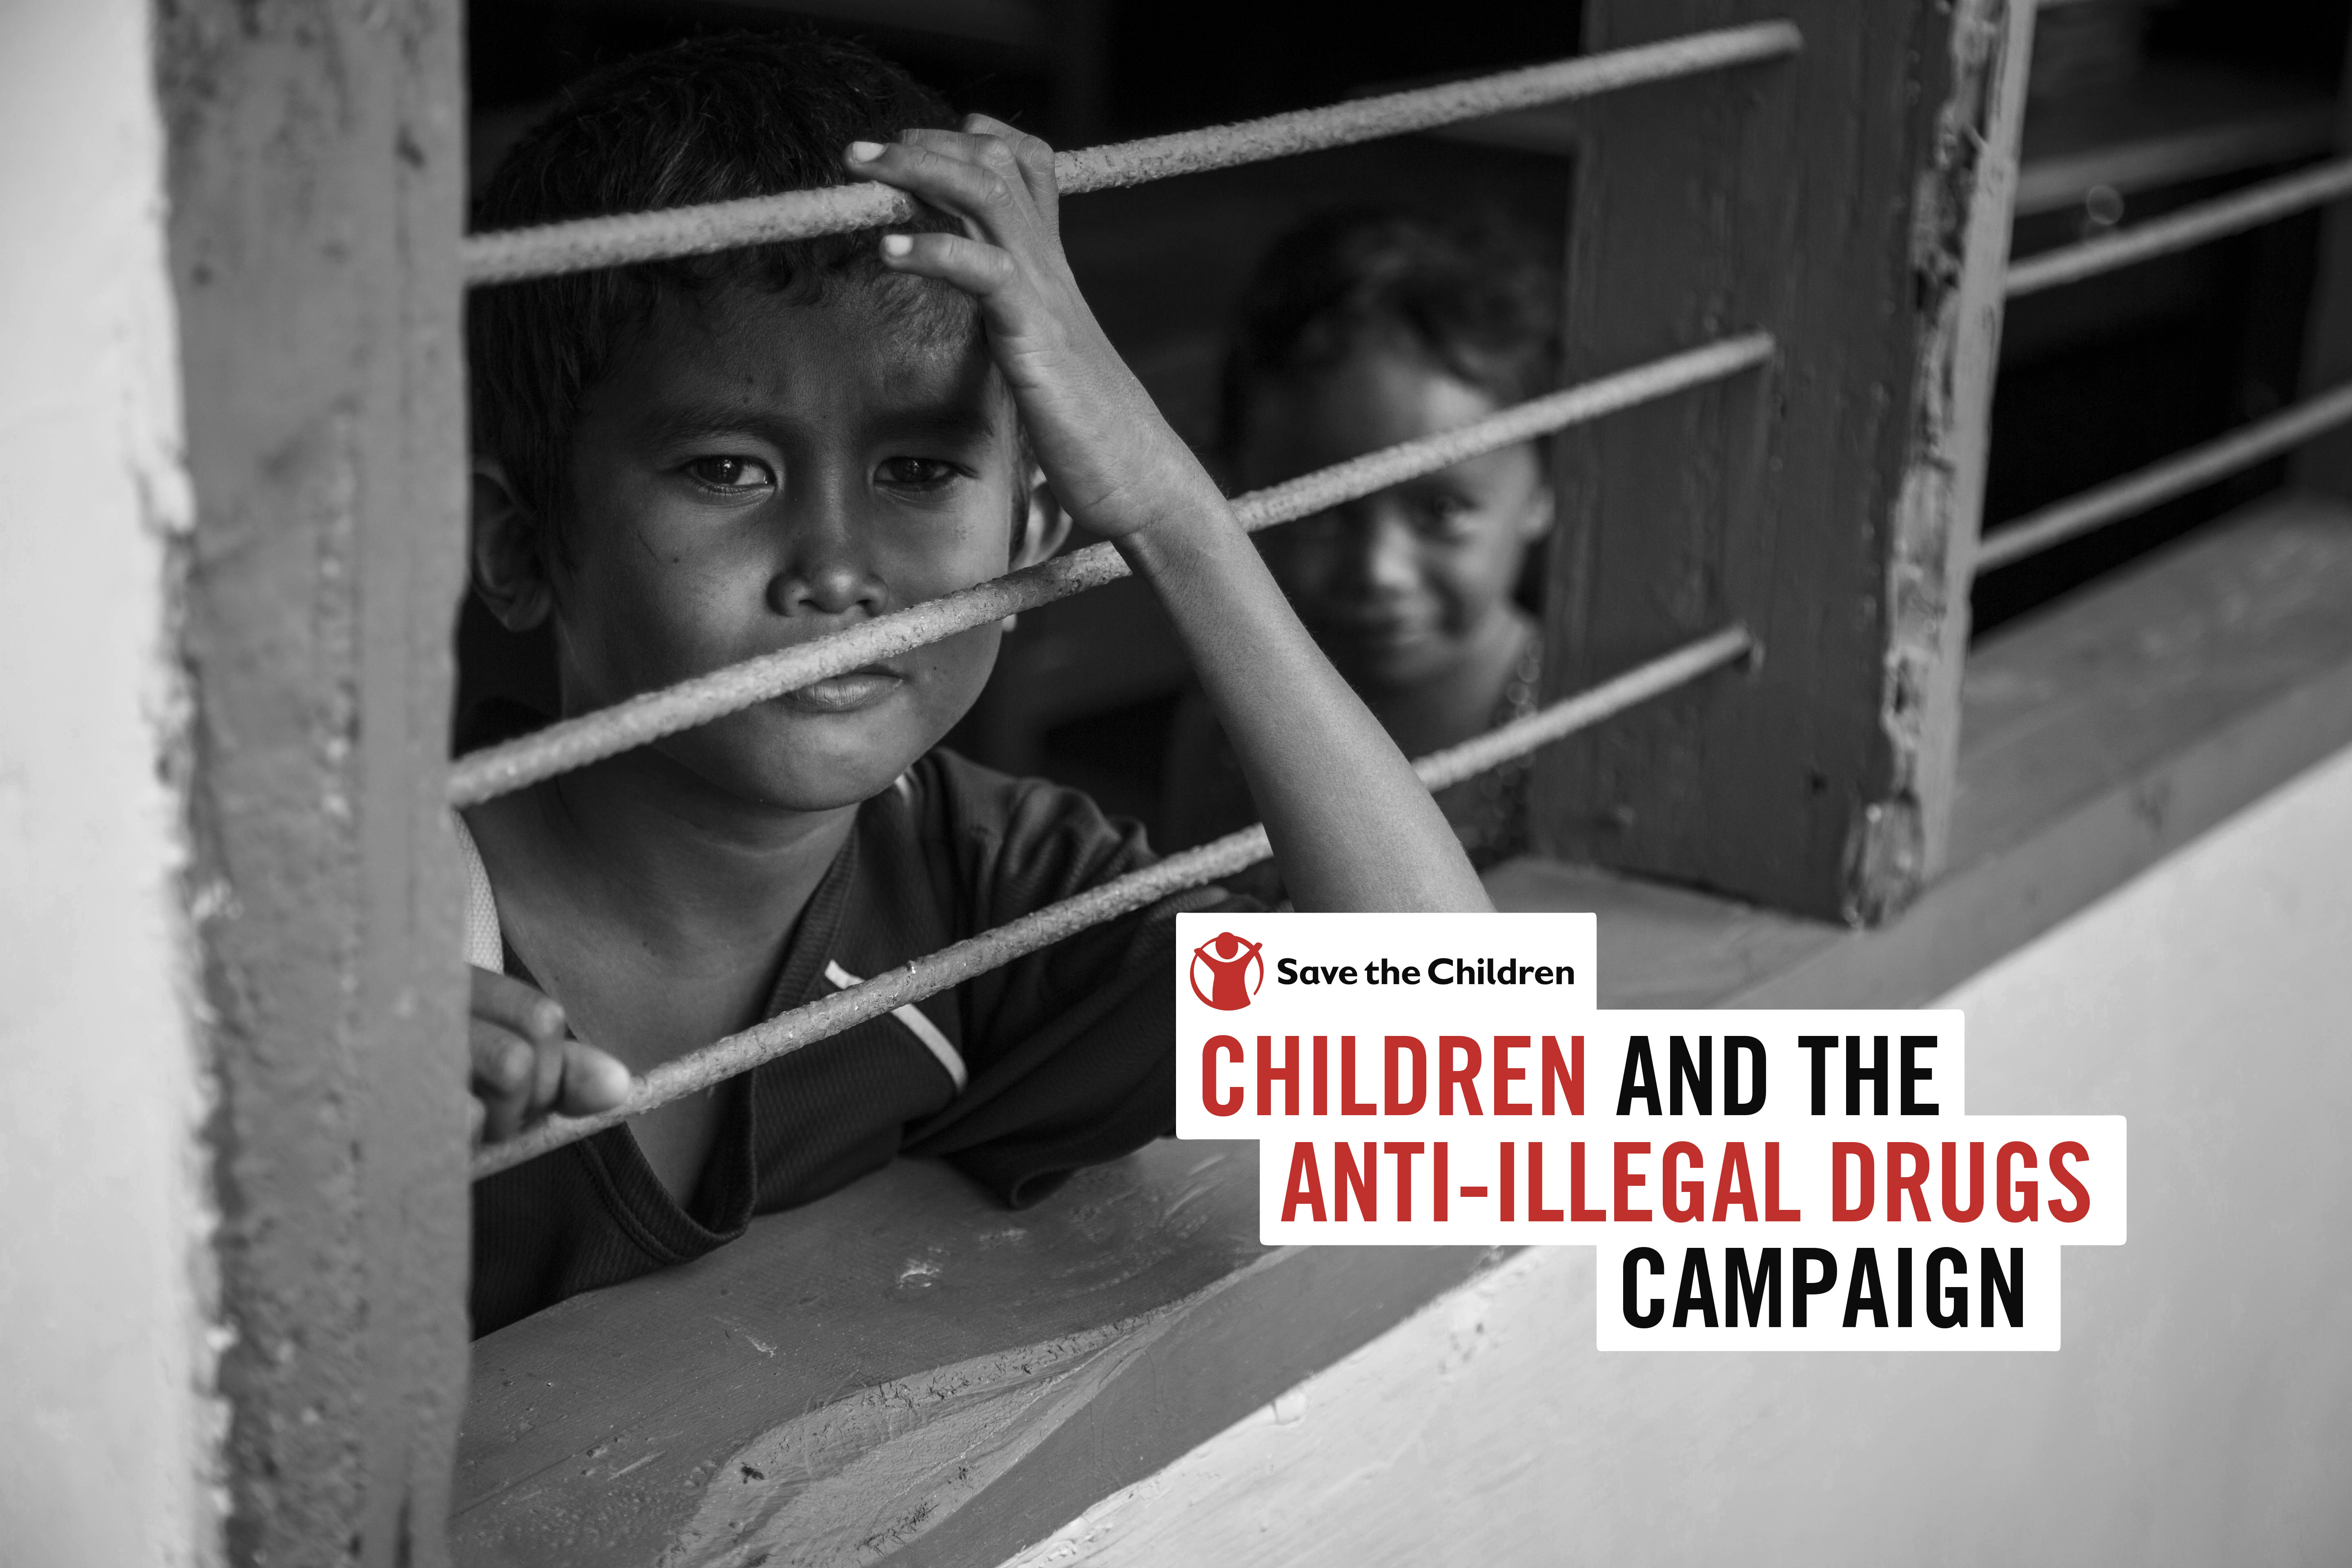 Save the Children condemns the death of any child in relation to the war against illegal drugs